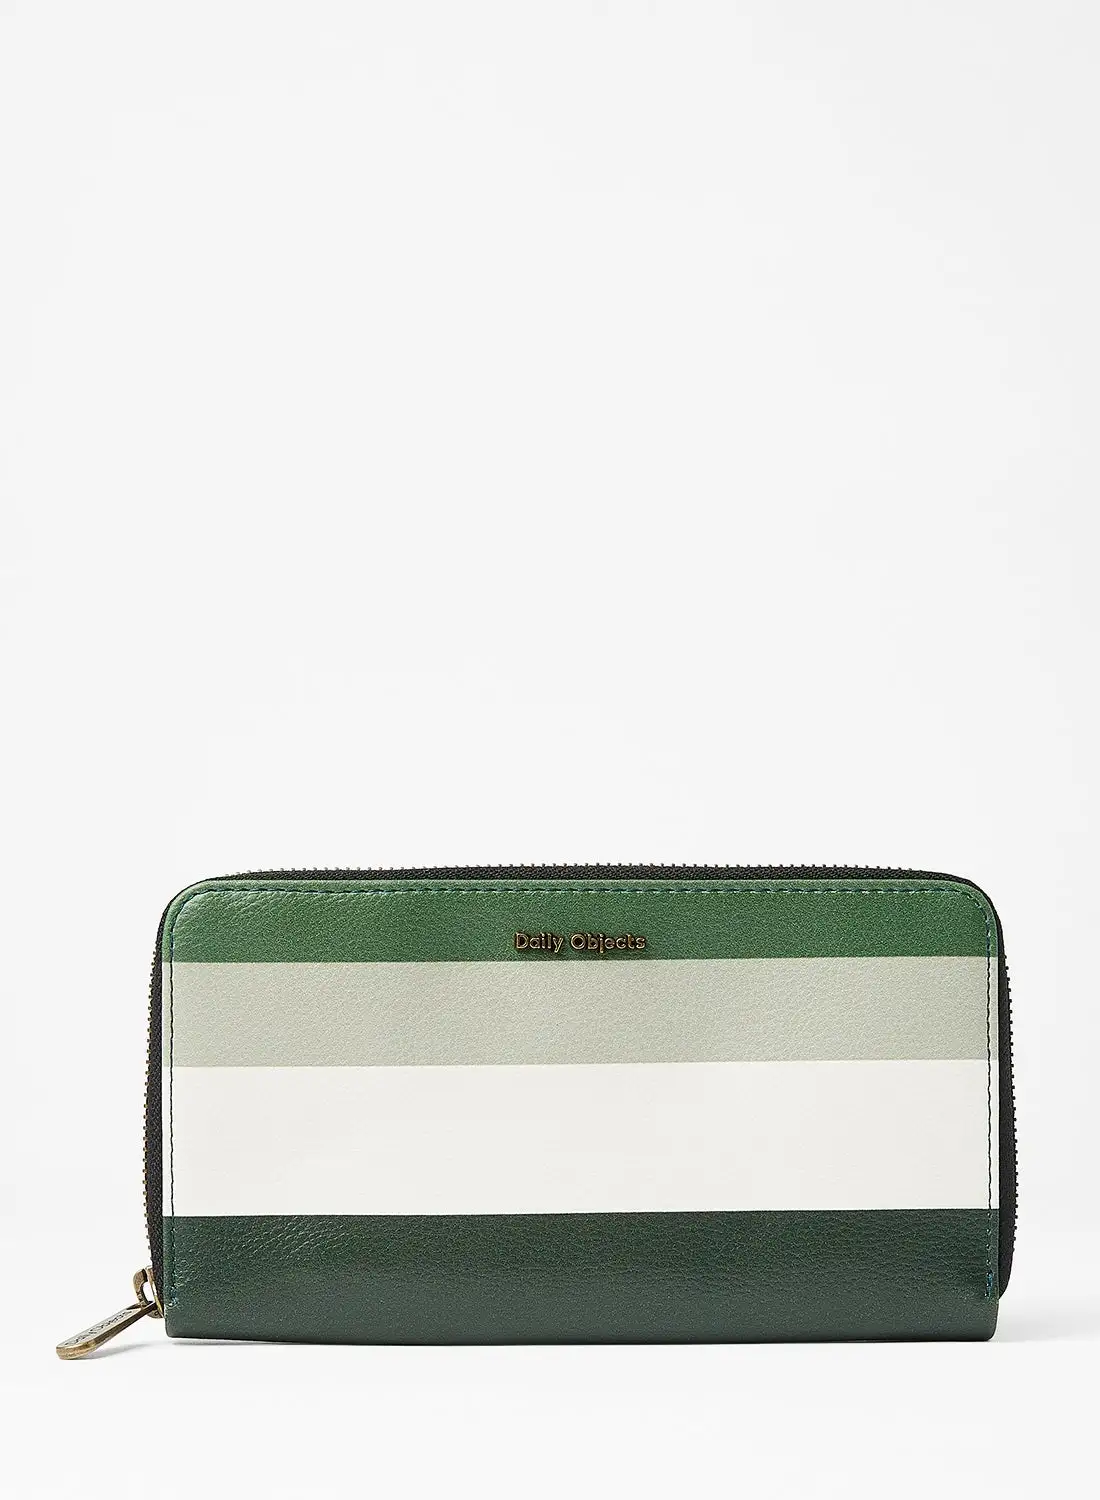 DailyObjects Quad Classic Wallet Green/White